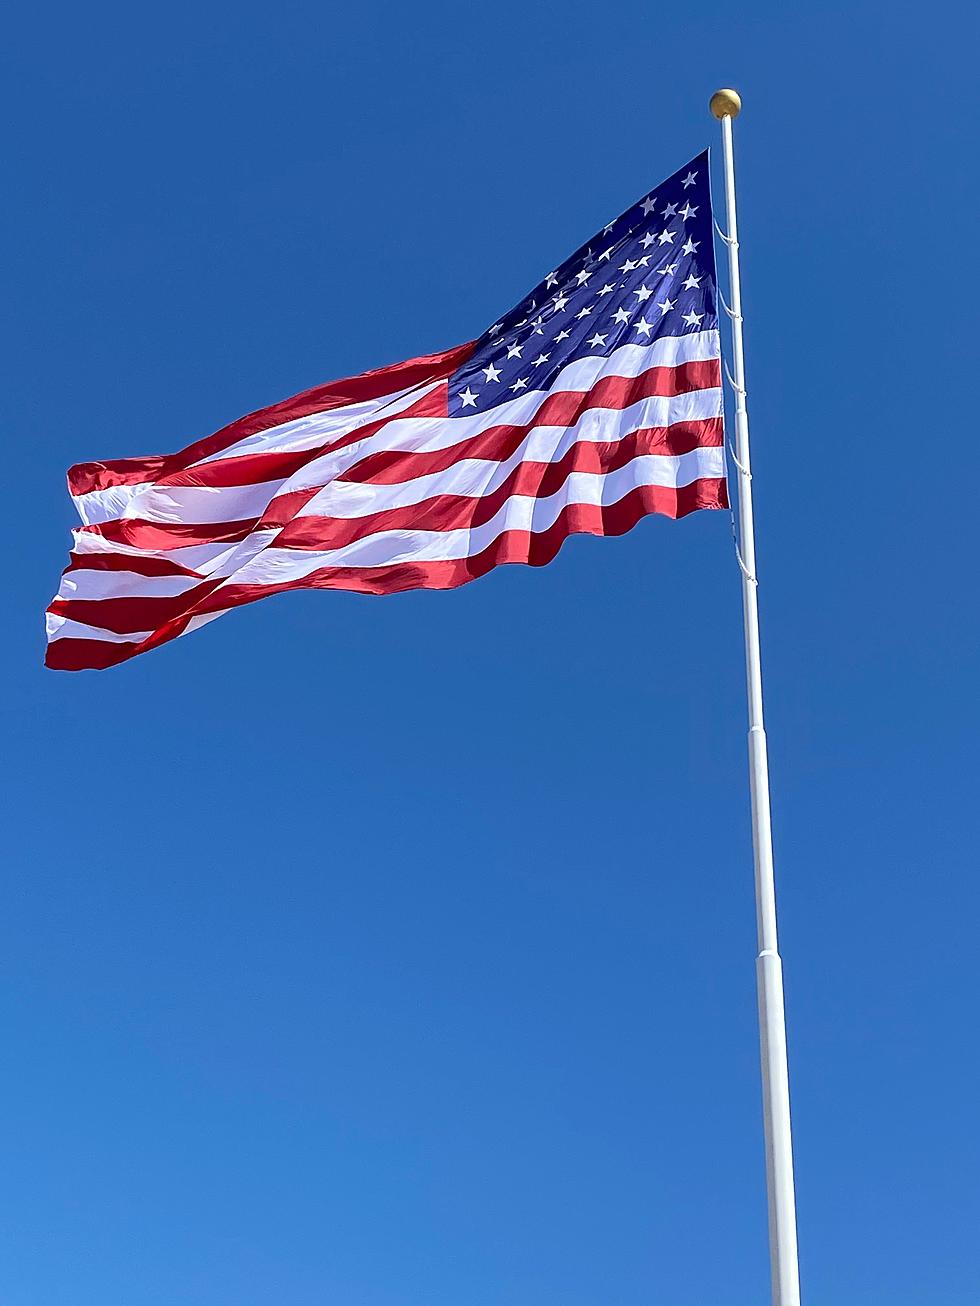 Why The Flag at El Paso’s Old Glory Memorial Needs To Keep Flying